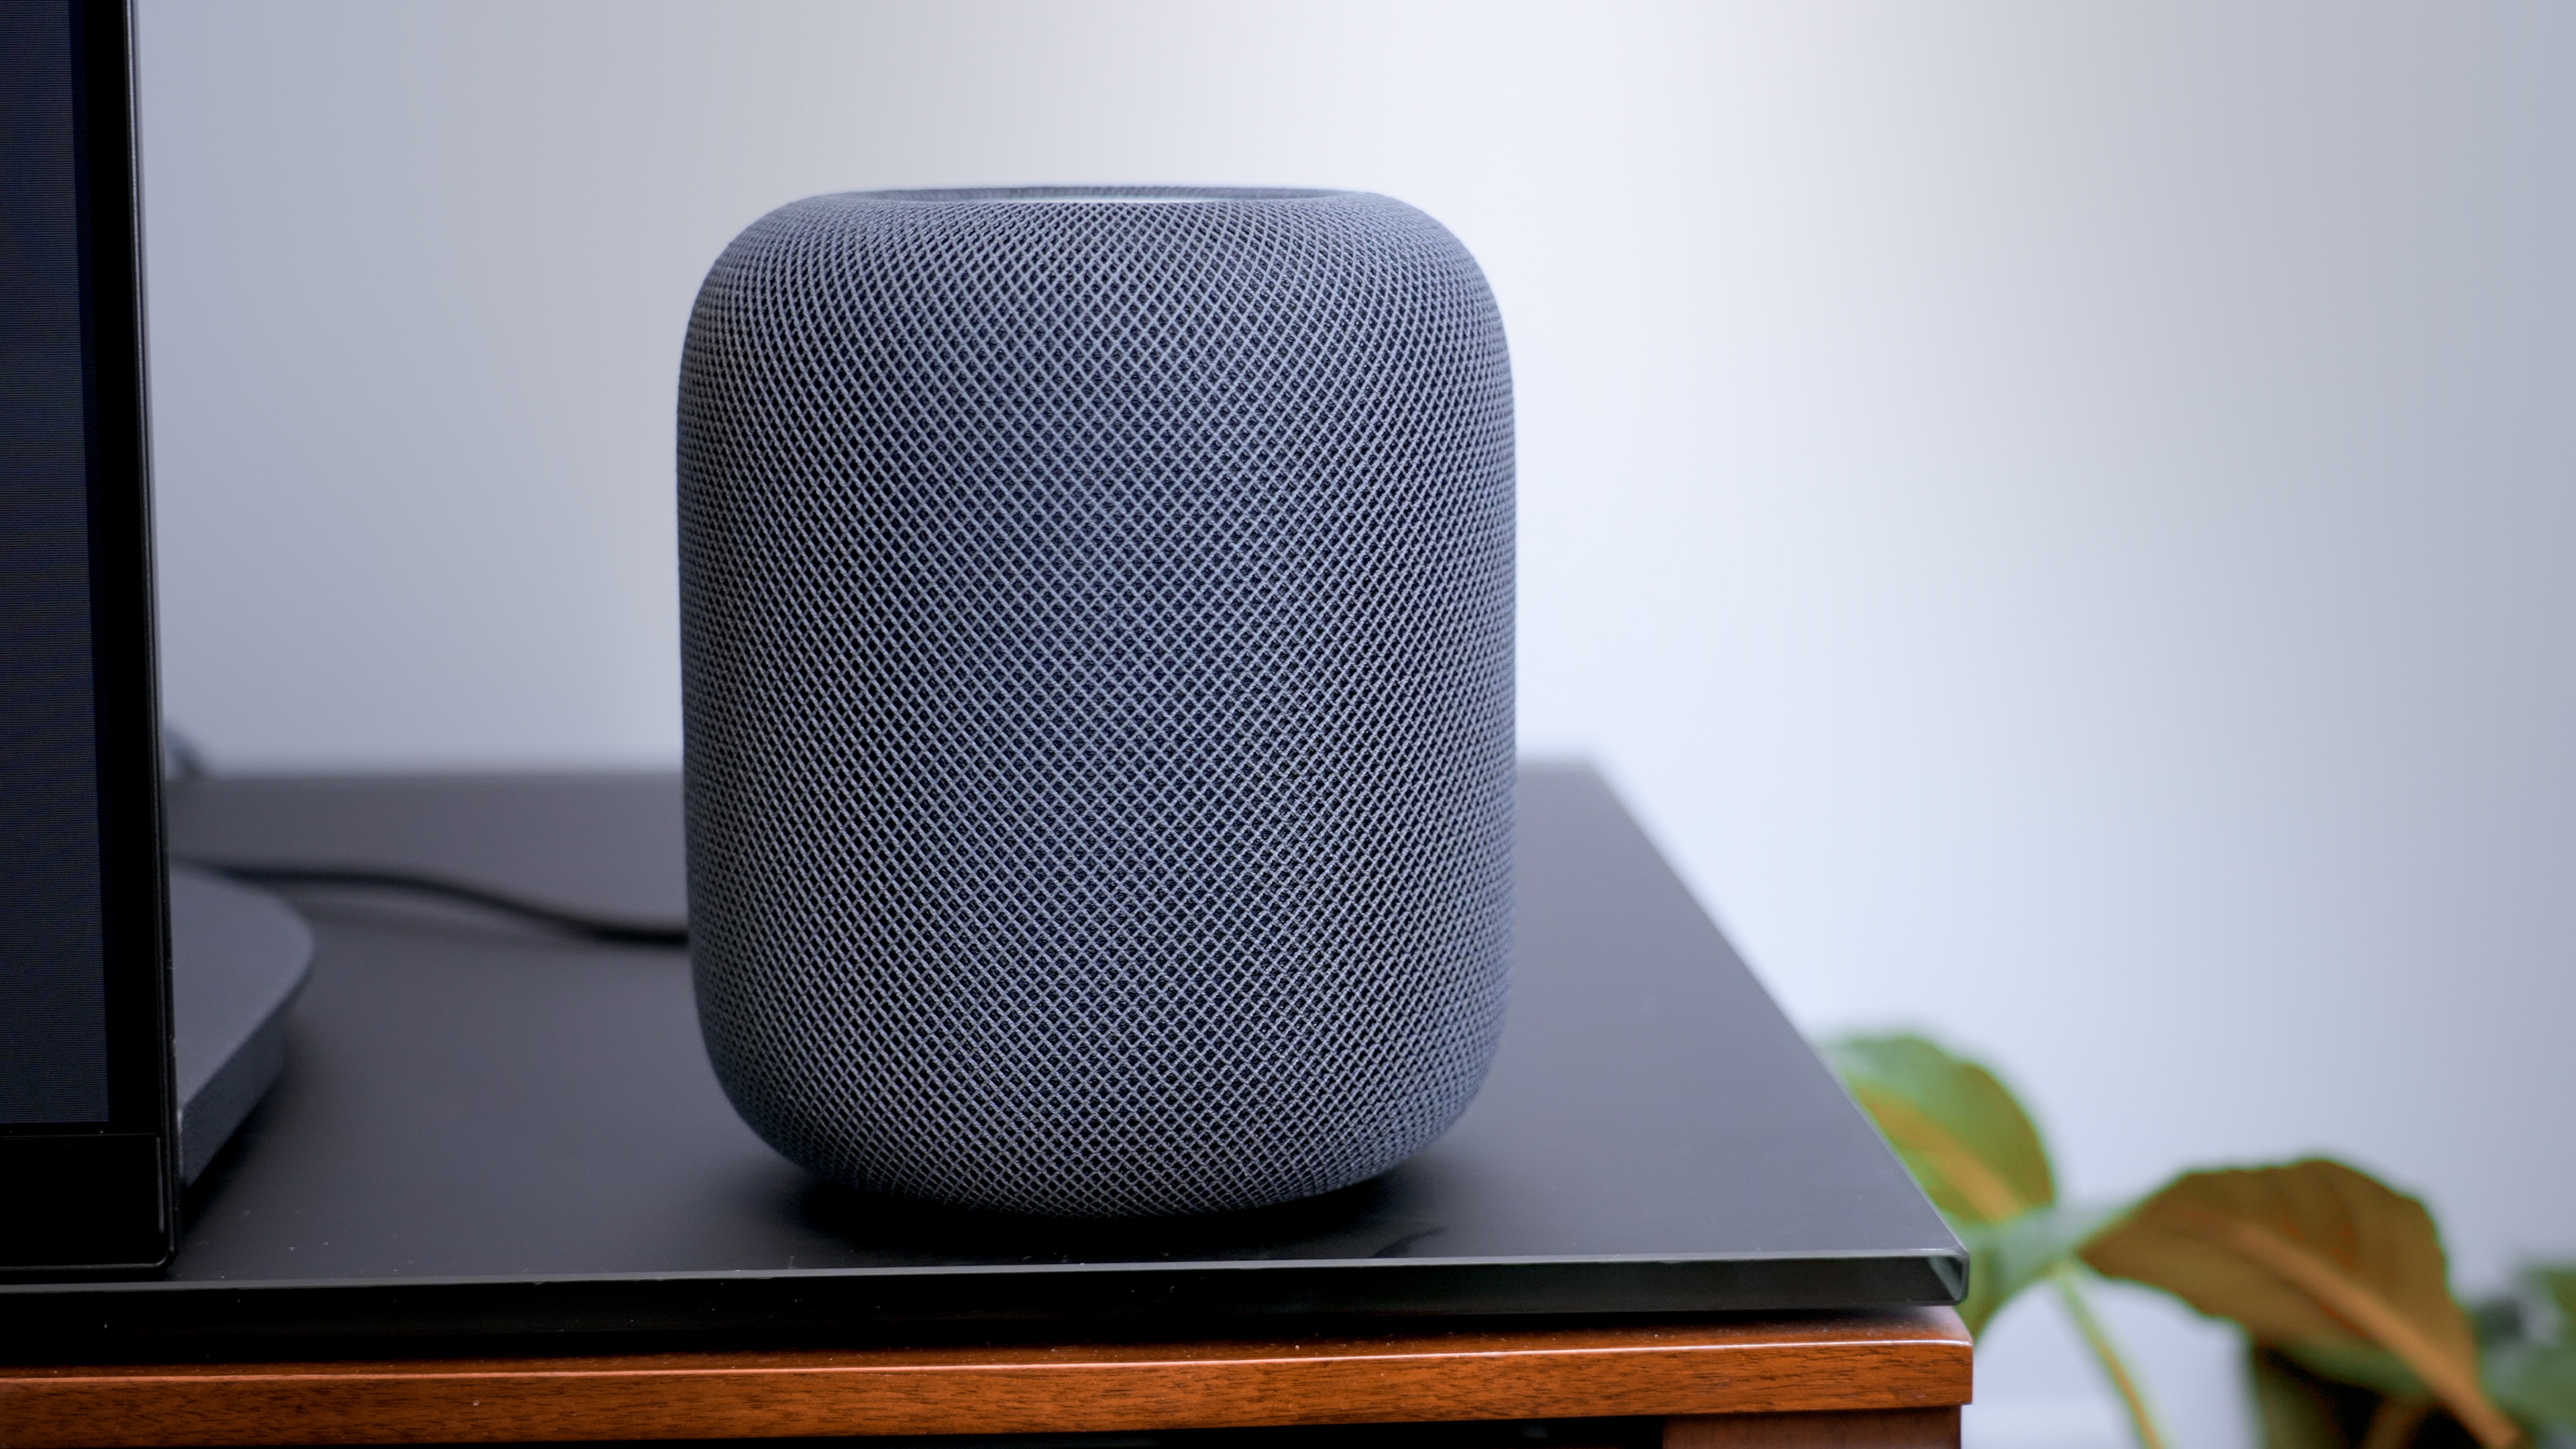 New Apple HomePod (2nd Gen): How to preorder